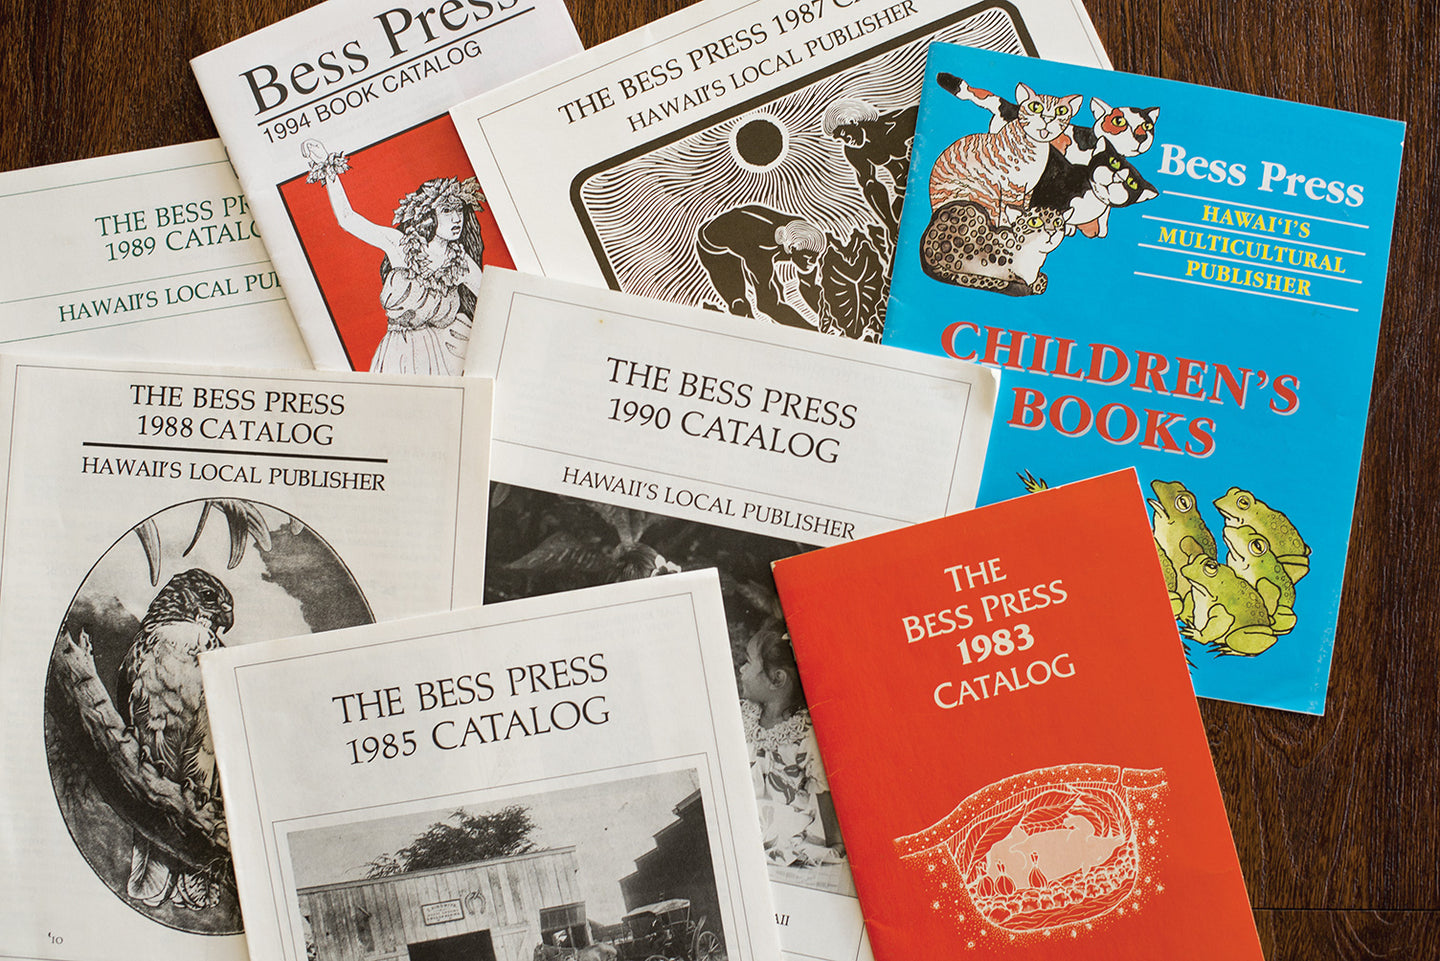 41 Years of Publishing for Hawaiʻi